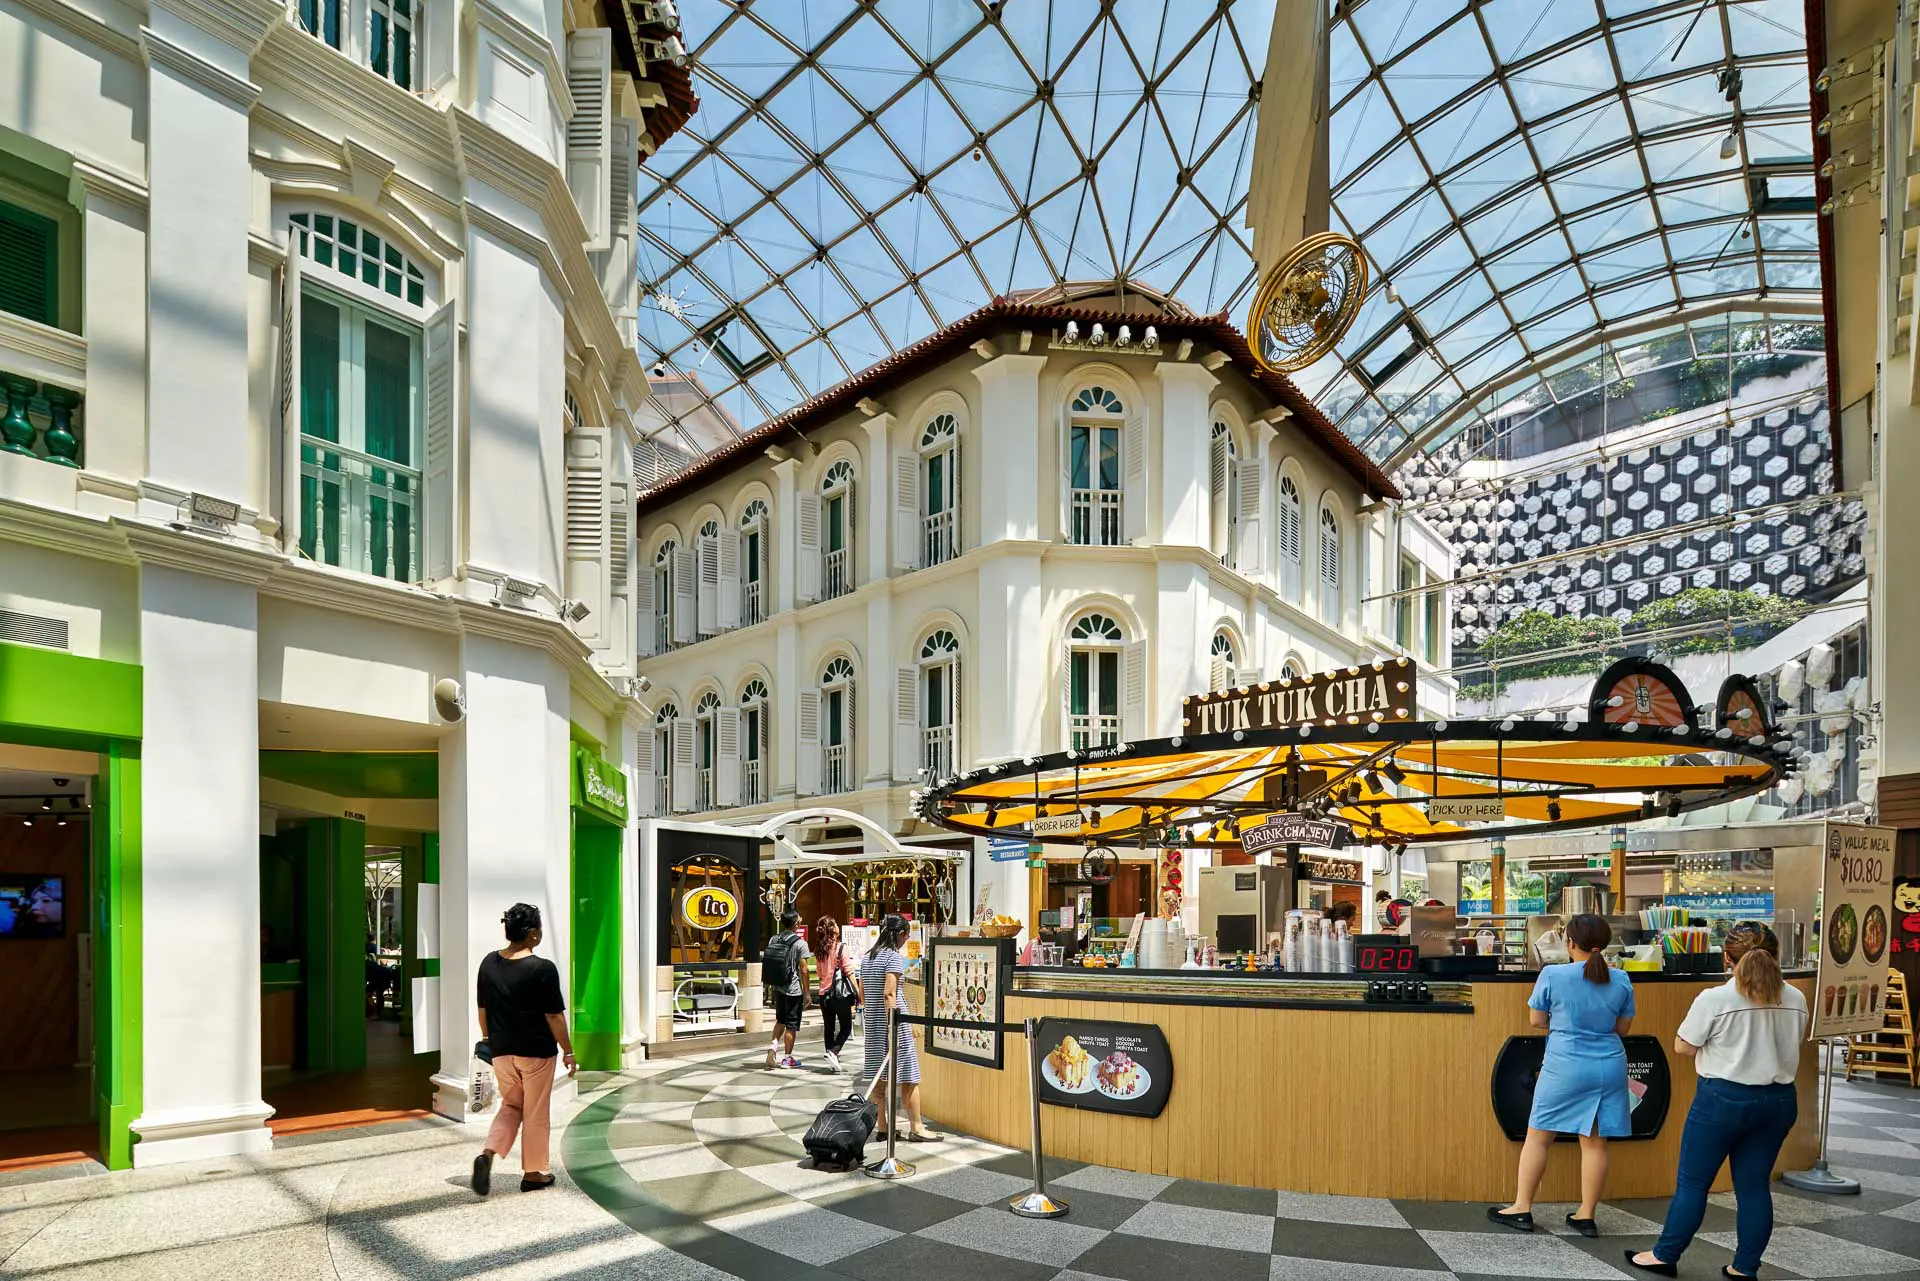 Bugis Junction: Recommended Shopping Mall